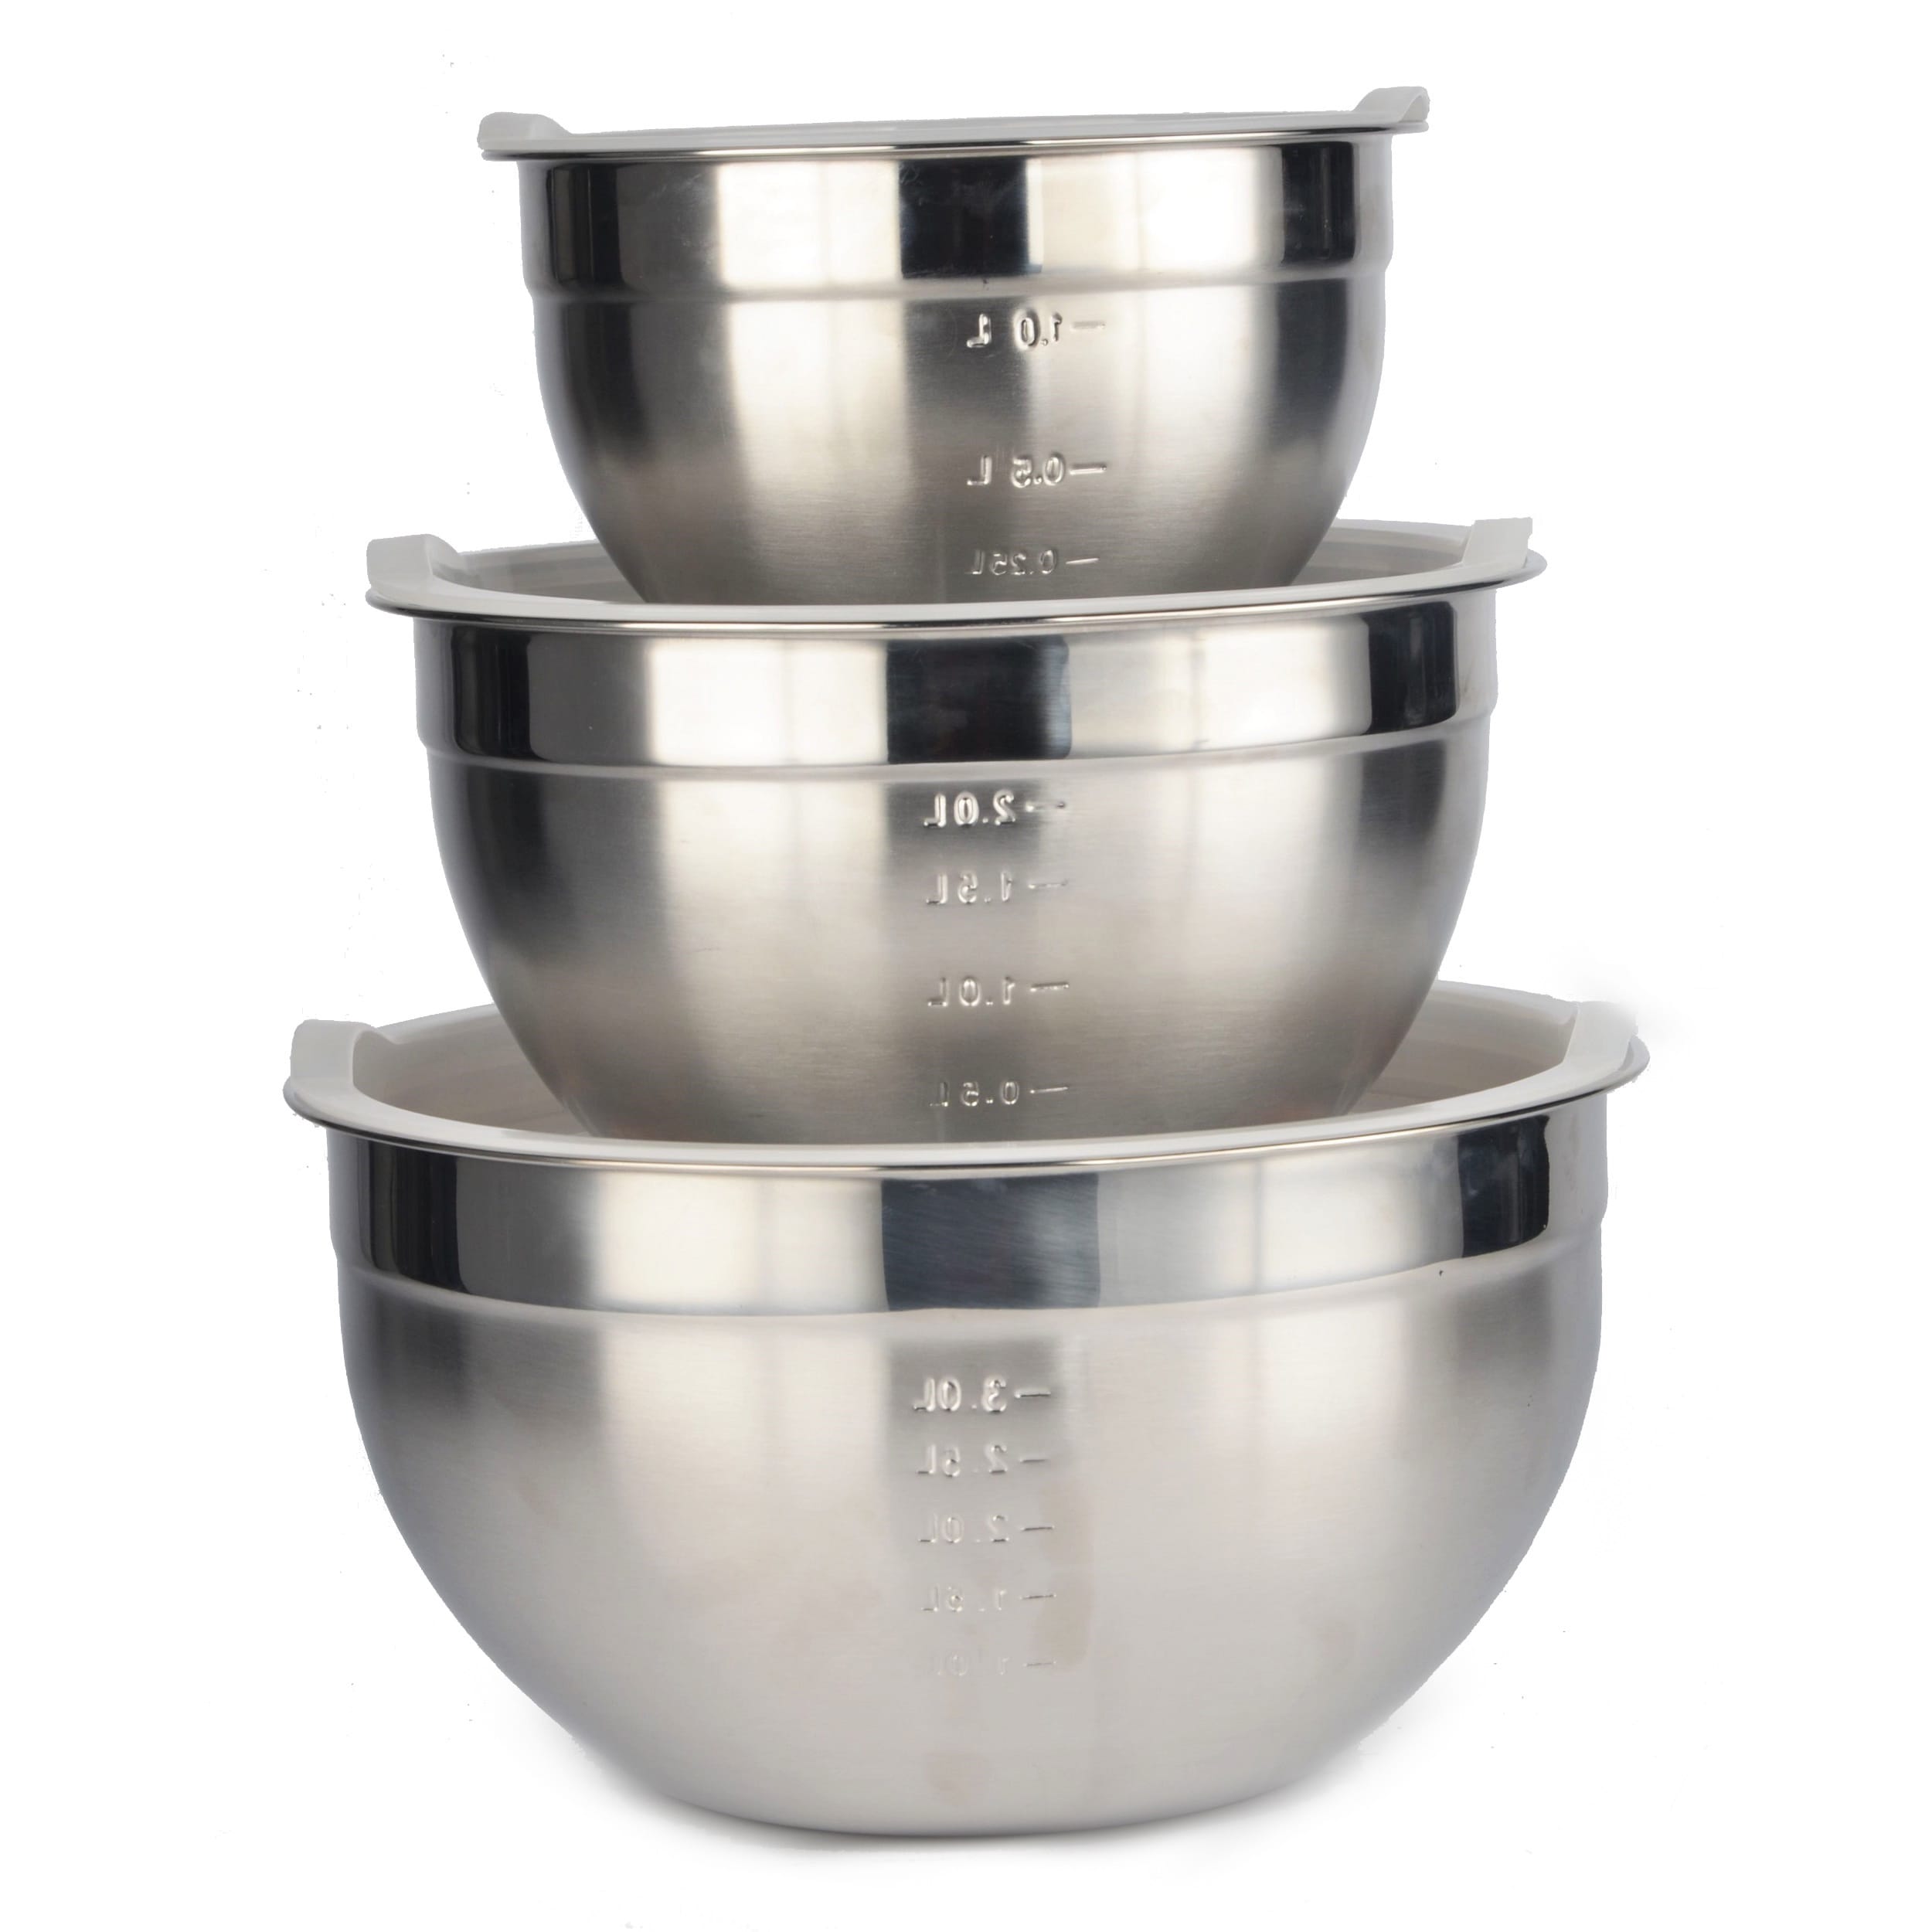 https://ak1.ostkcdn.com/images/products/12497213/Prime-Cook-Stainless-Steel-6-piece-Mixing-Bowl-Set-118f2cf5-ca75-44ec-ad5e-a21103f4bacd.jpg